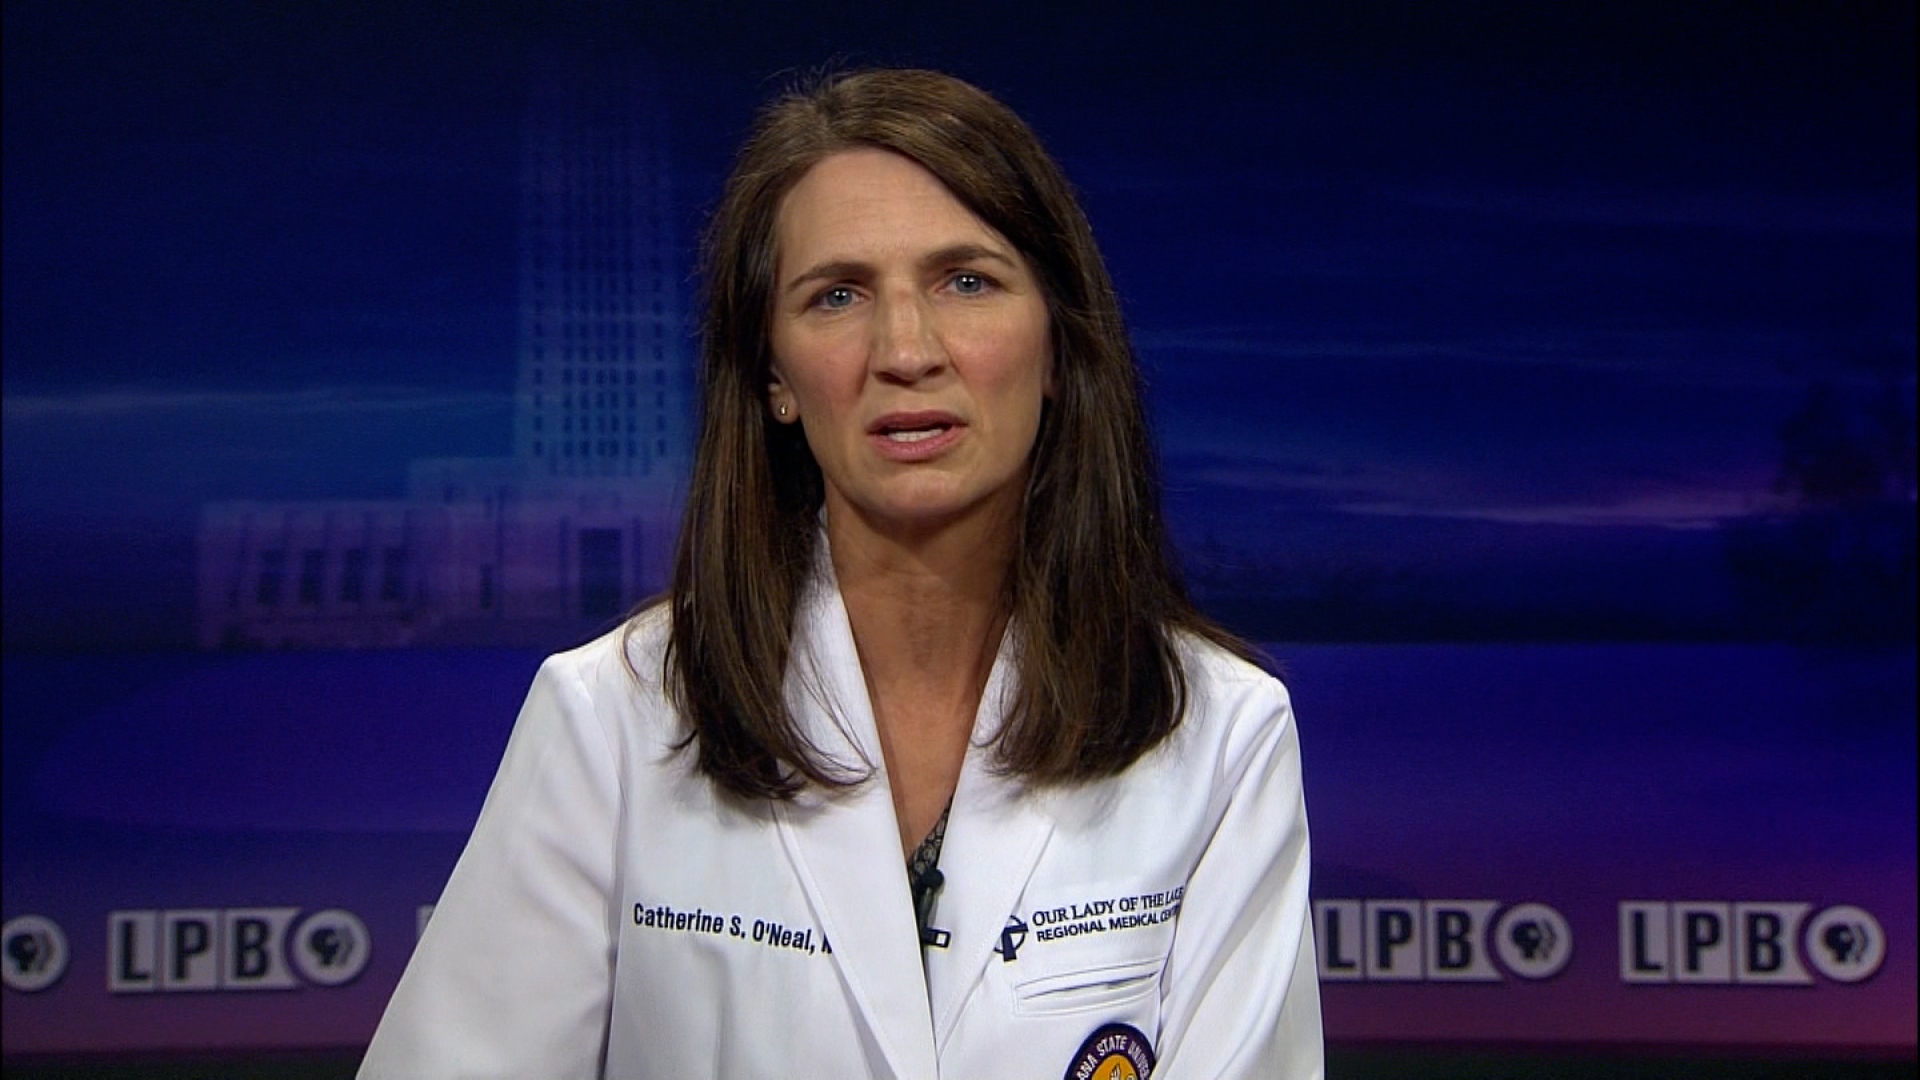 Dr. Catherine O'Neal, chief medical officer at Our Lady of the Lake Regional Medical Center in Baton Rogue, speaks during an interview on July 15.